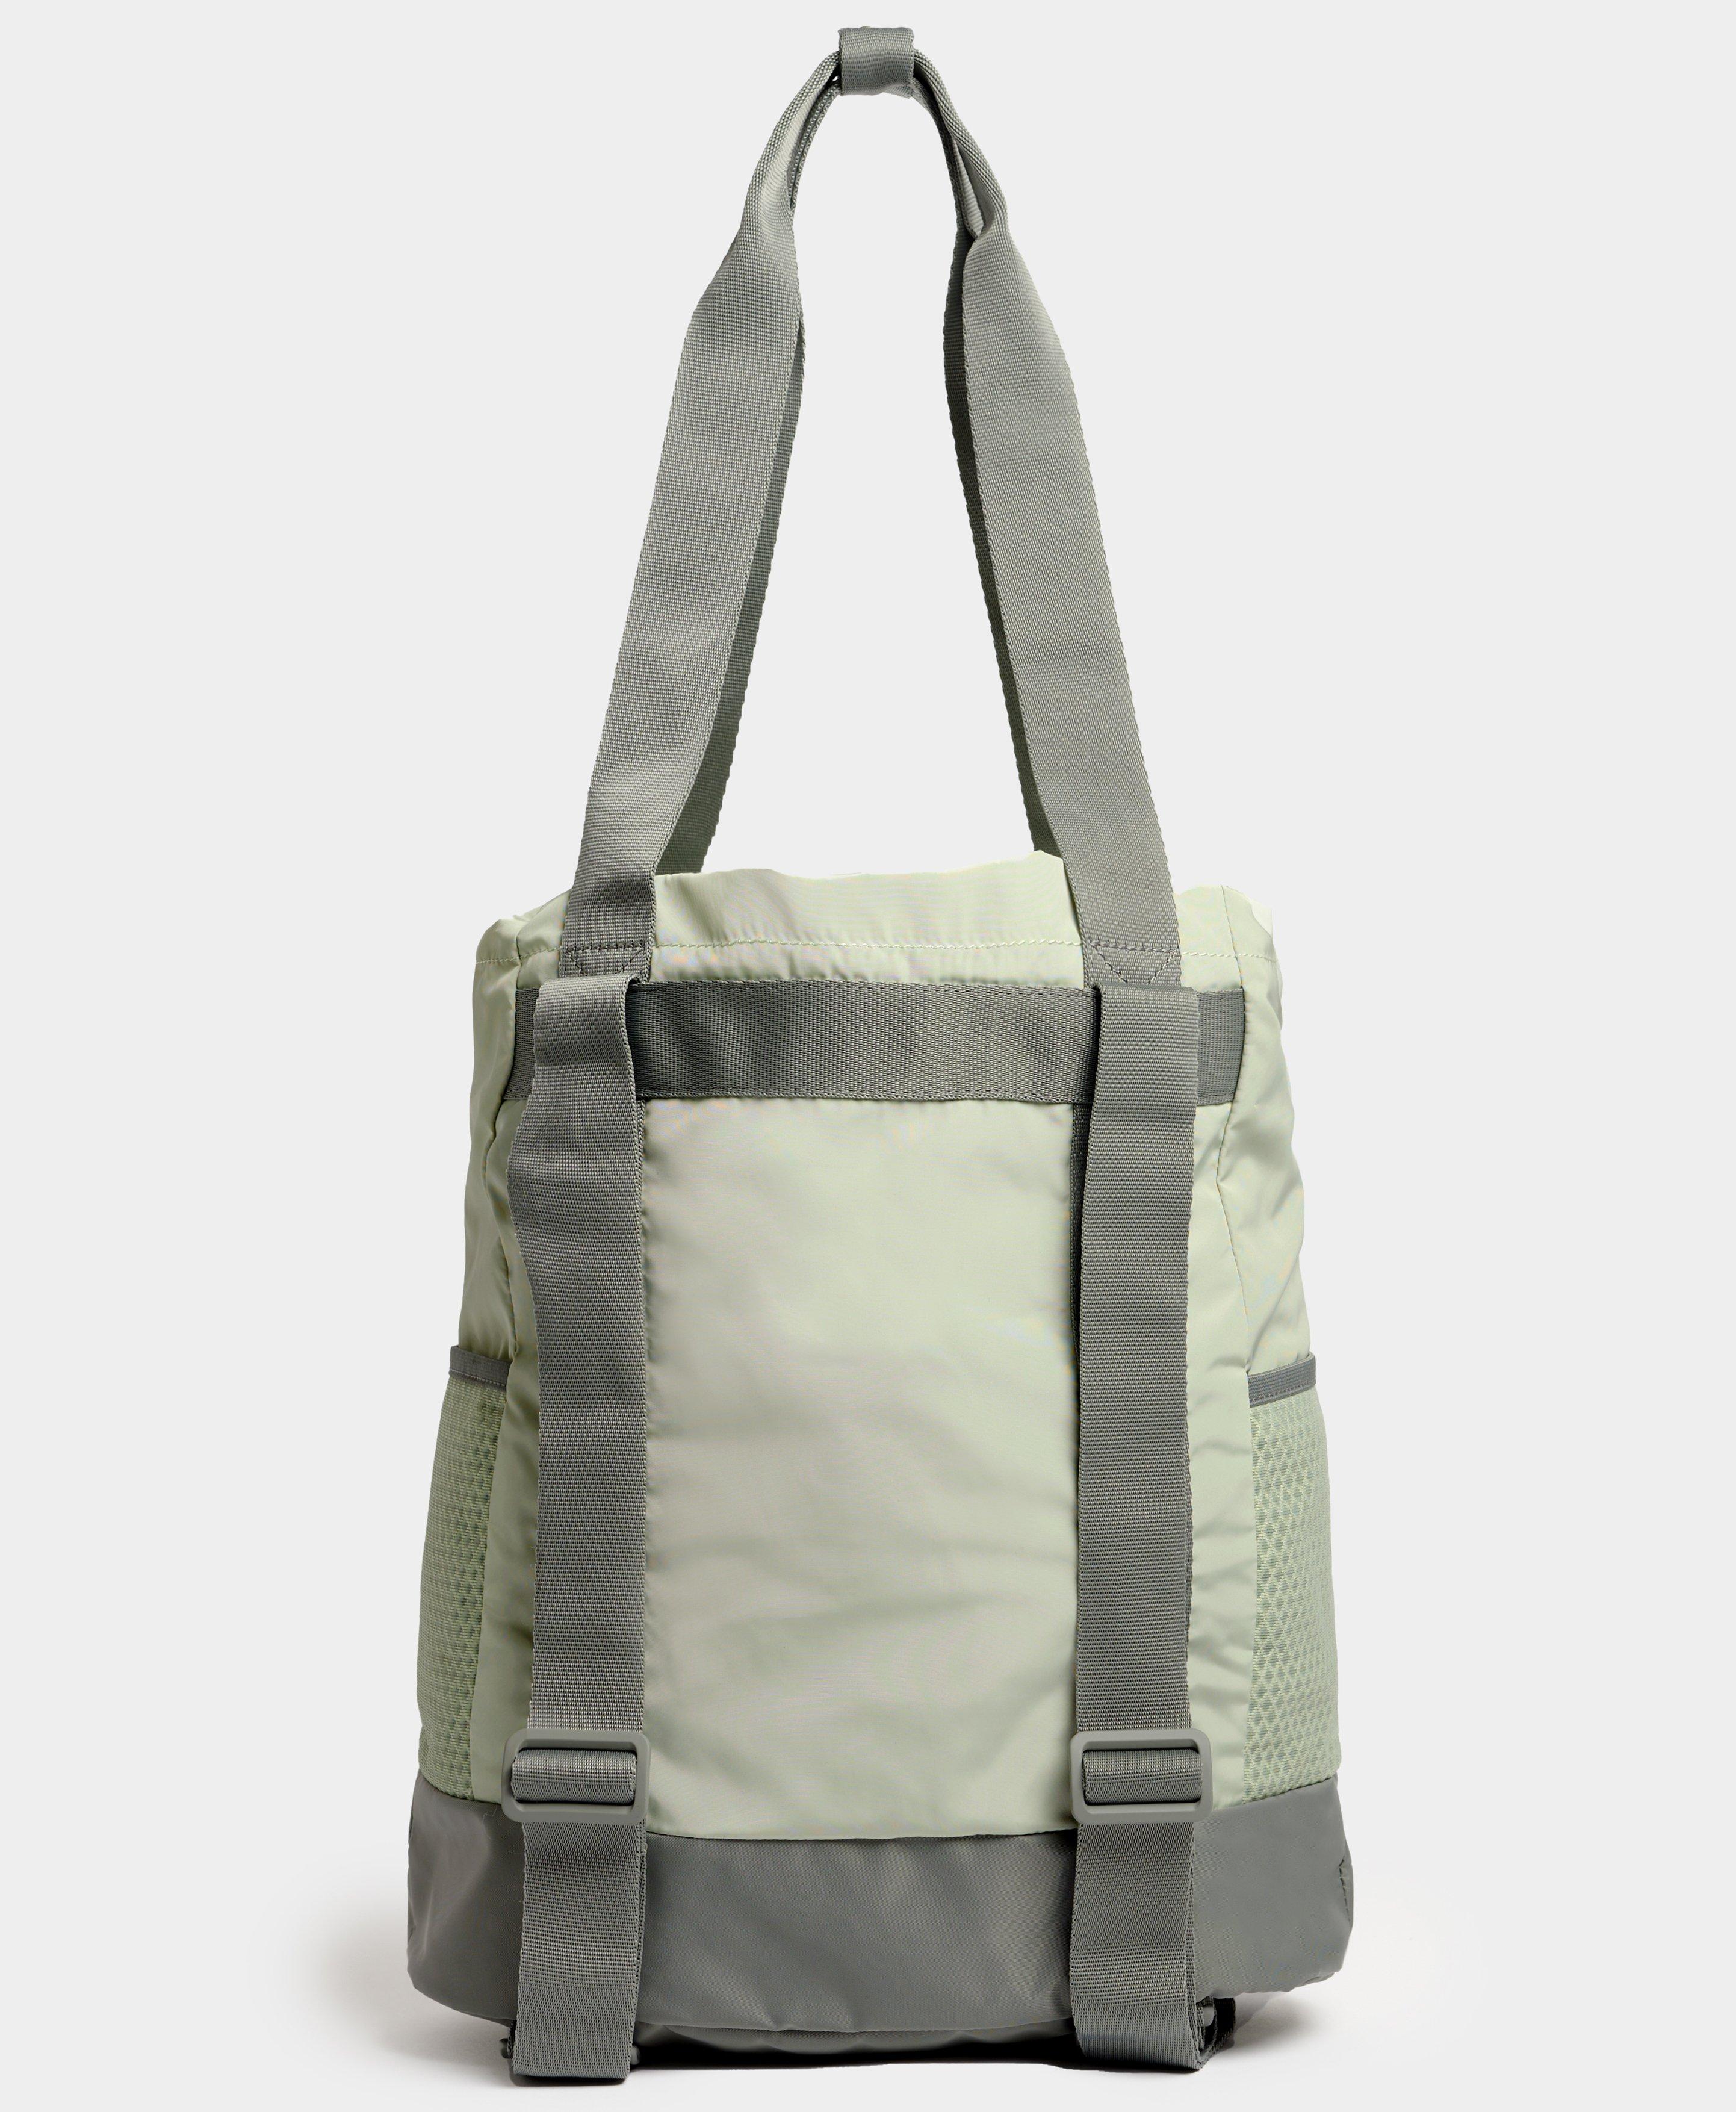 Sweaty Betty Adjustable Strap Tote Bags for Women